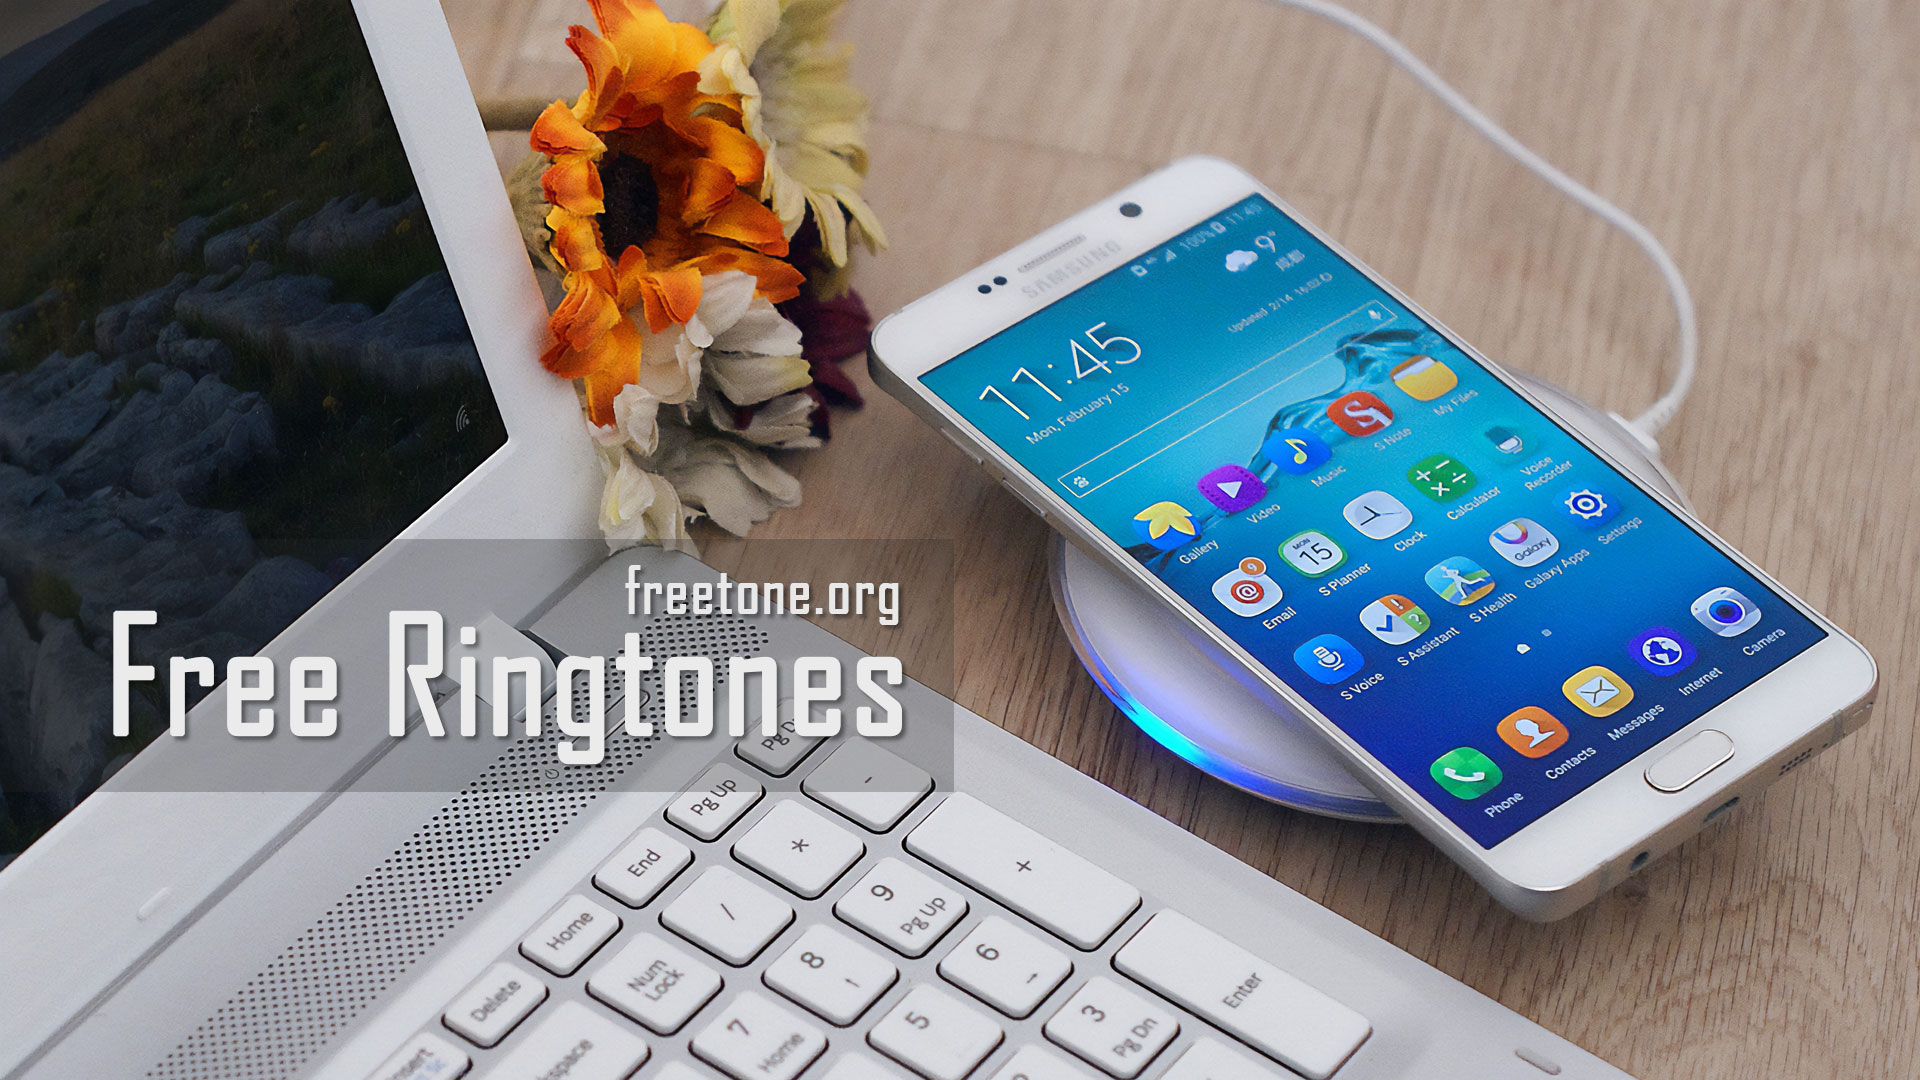 Free ringtones for Android phones